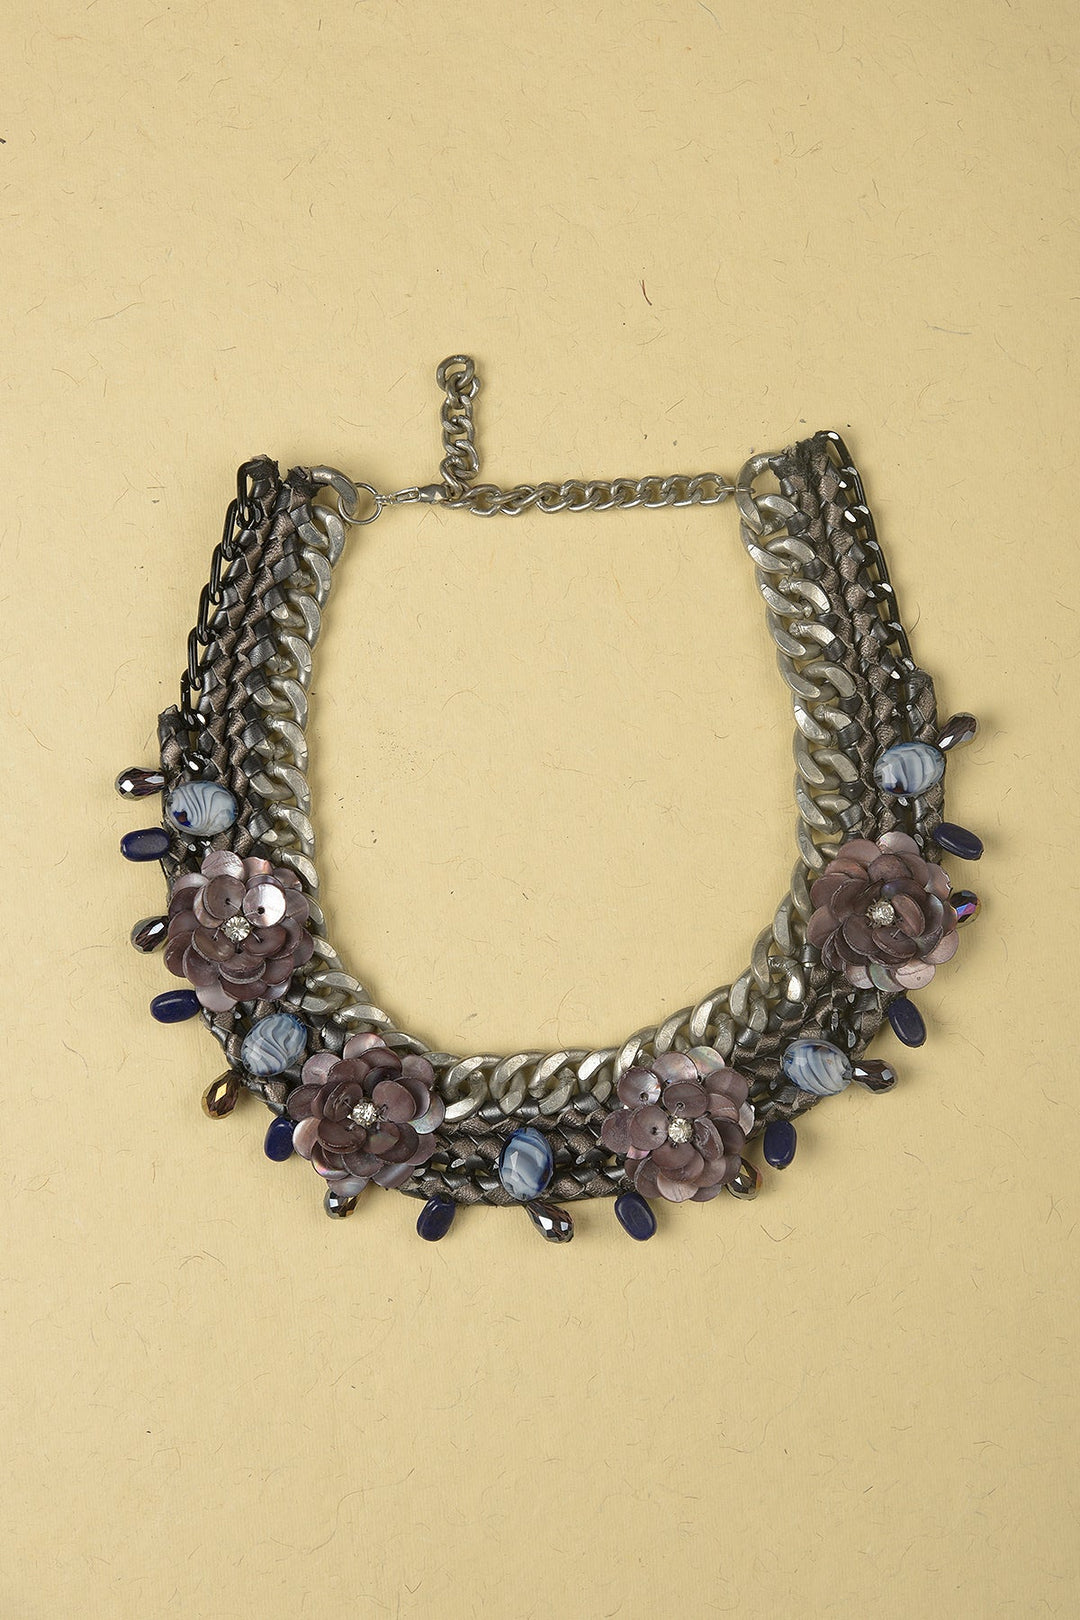 Necklace made of Iron Chains, Beads and Artificial Flowers